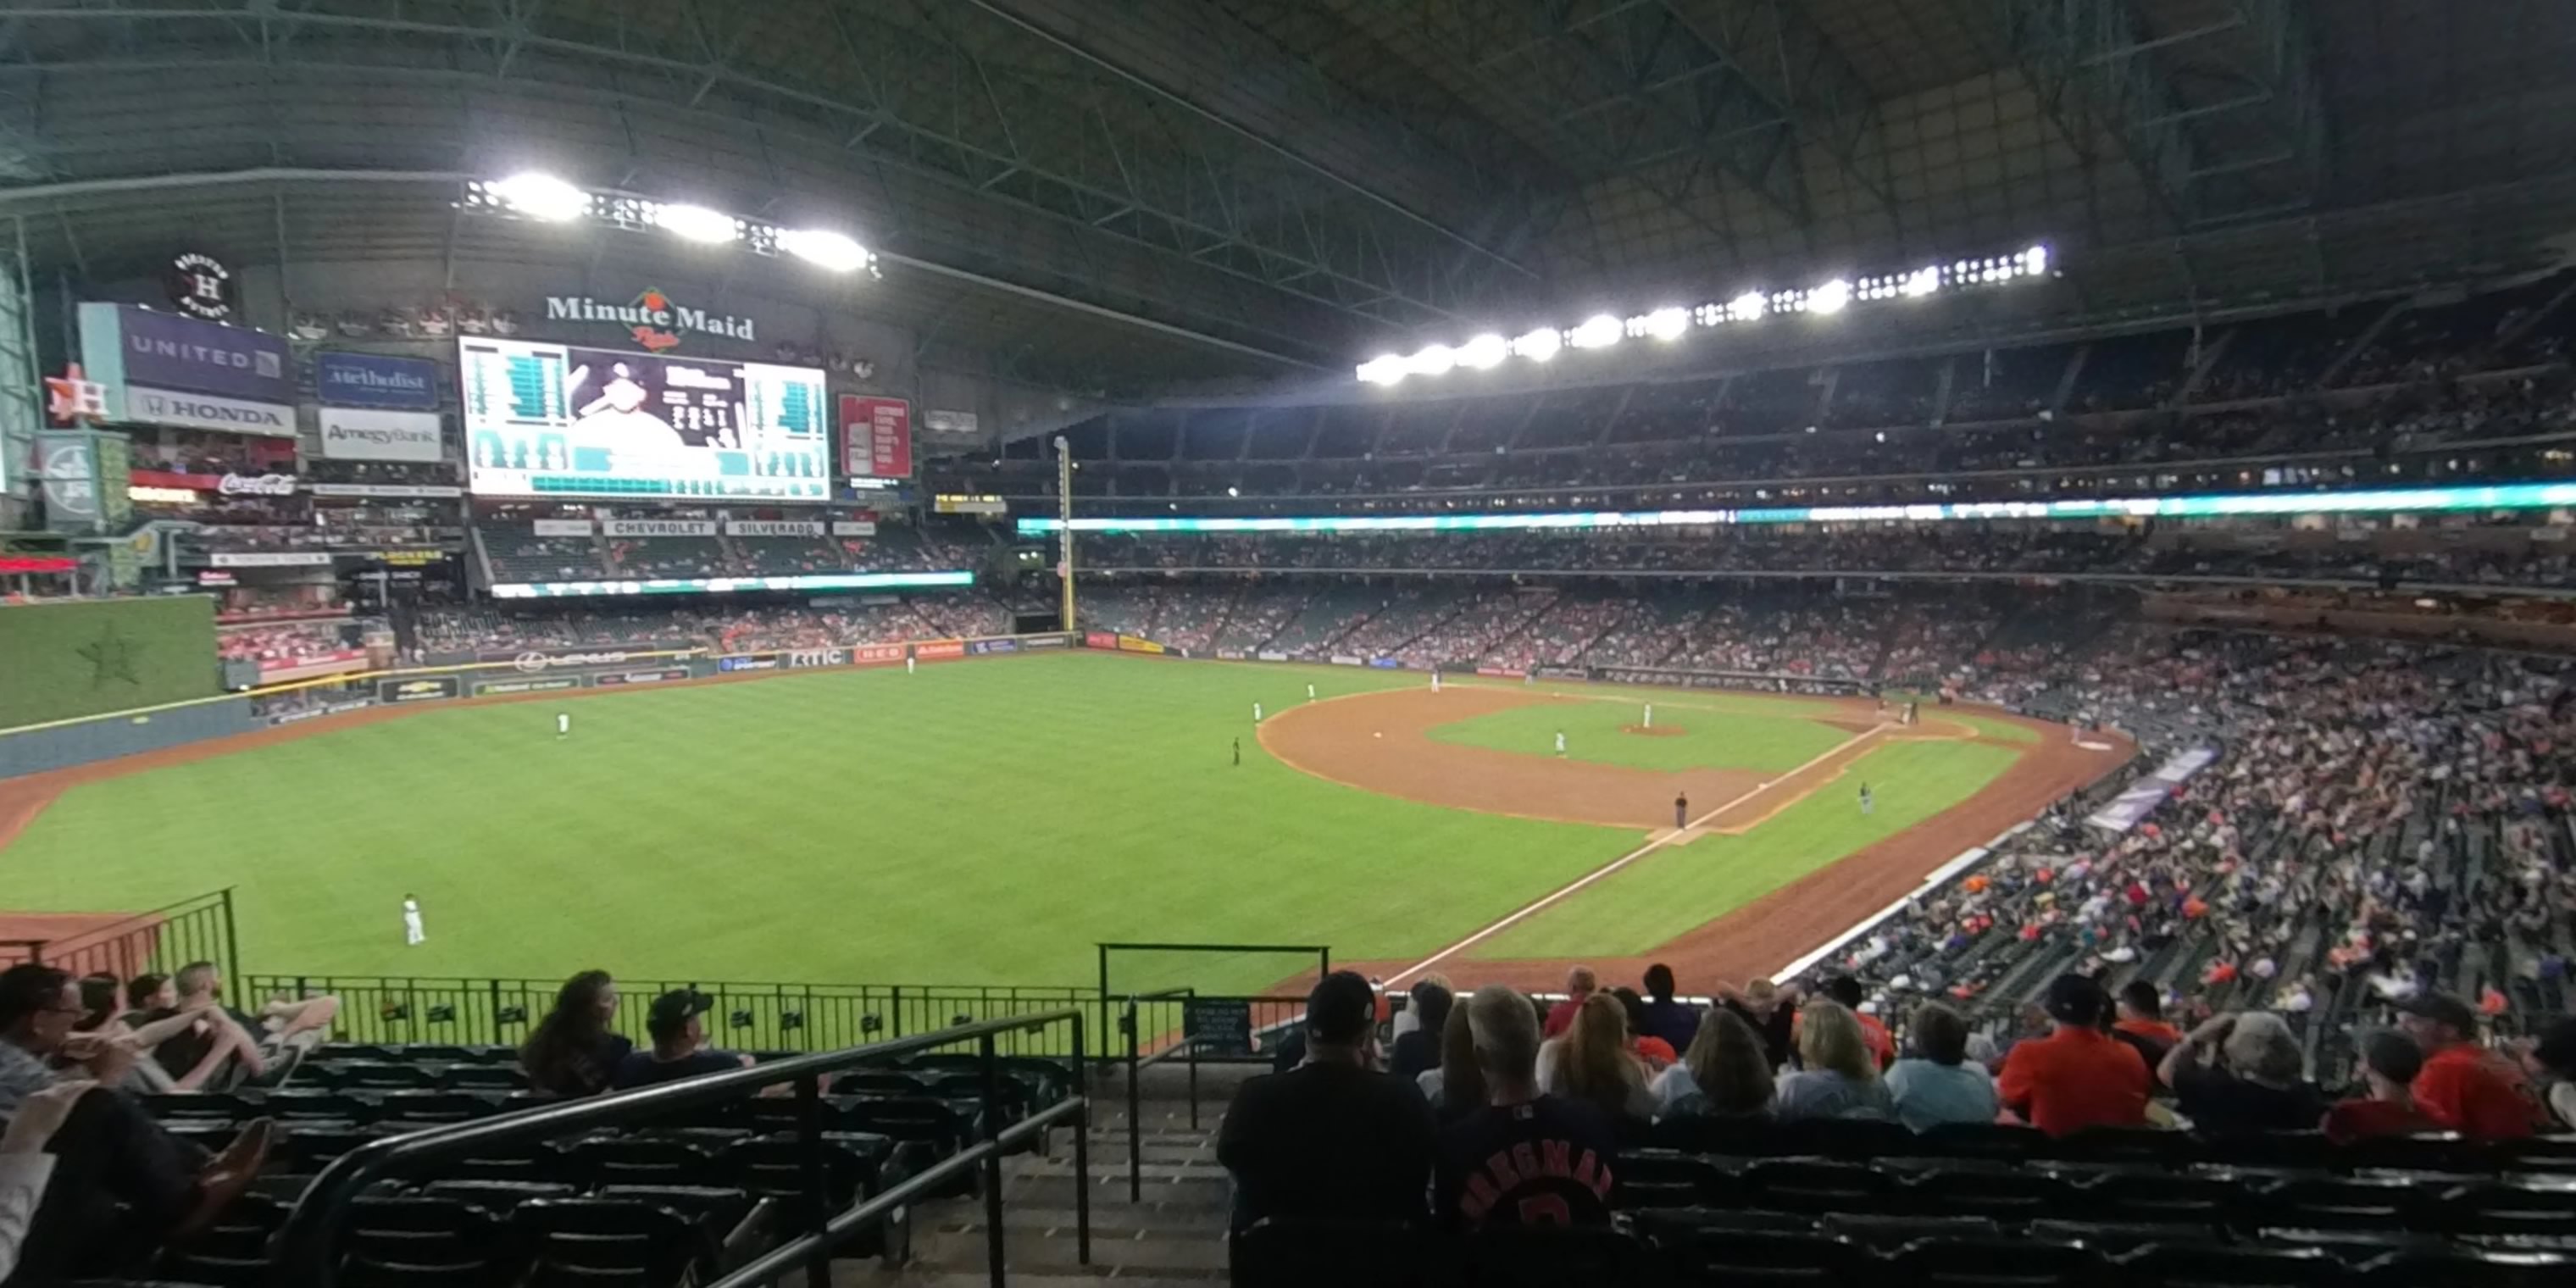 Section 205 at Minute Maid Park 